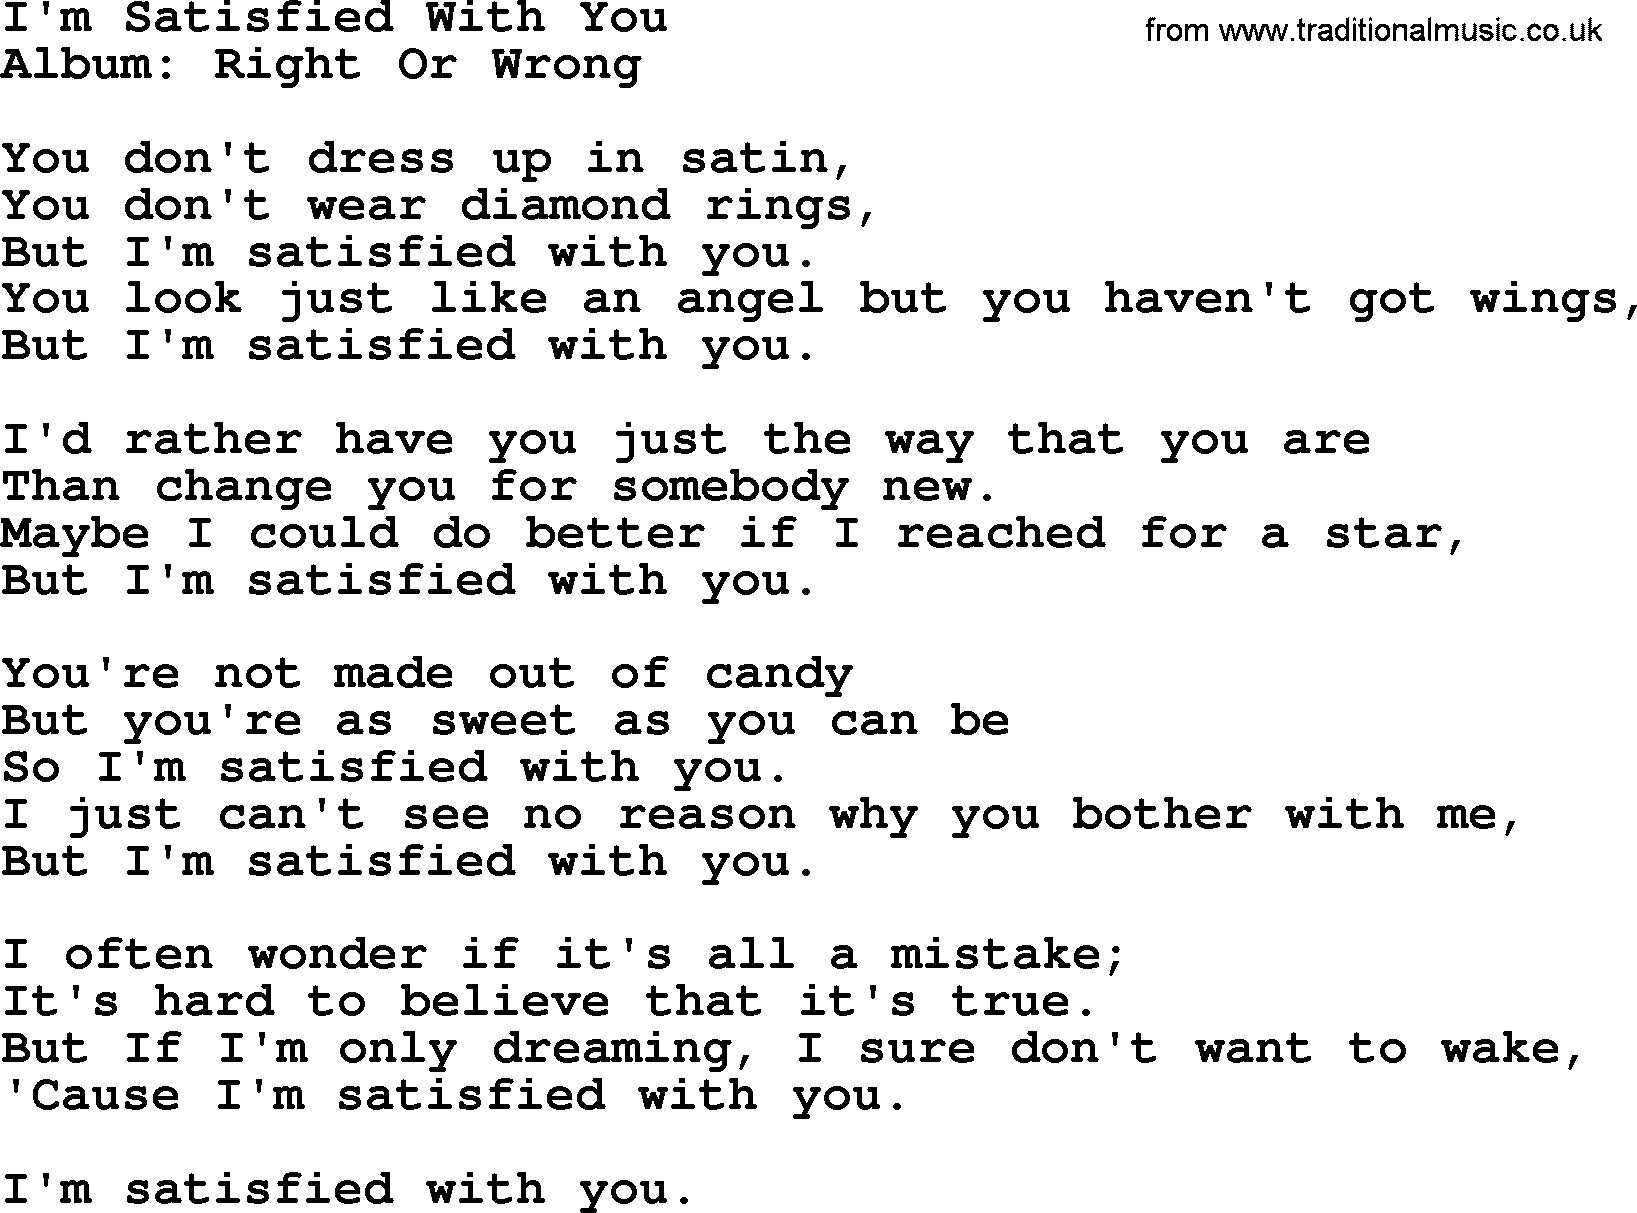 George Strait song: I'm Satisfied With You, lyrics